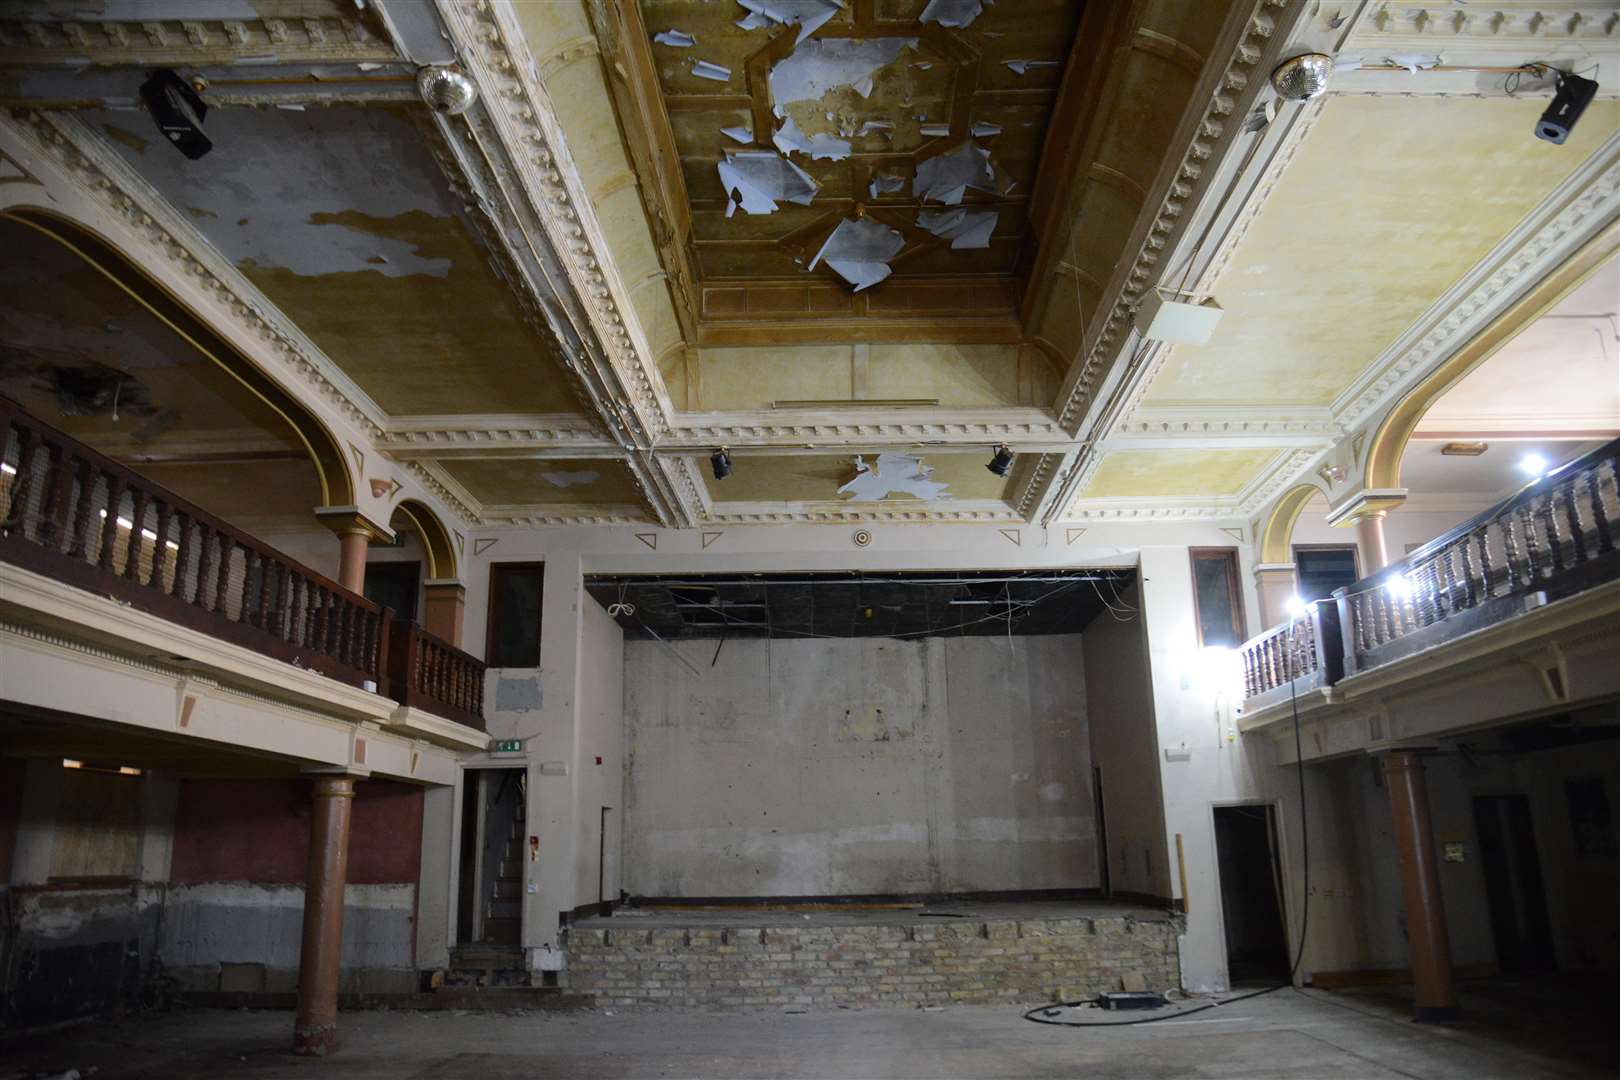 The centre stage is now stripped back to the original brickwork. Picture: Gary Browne